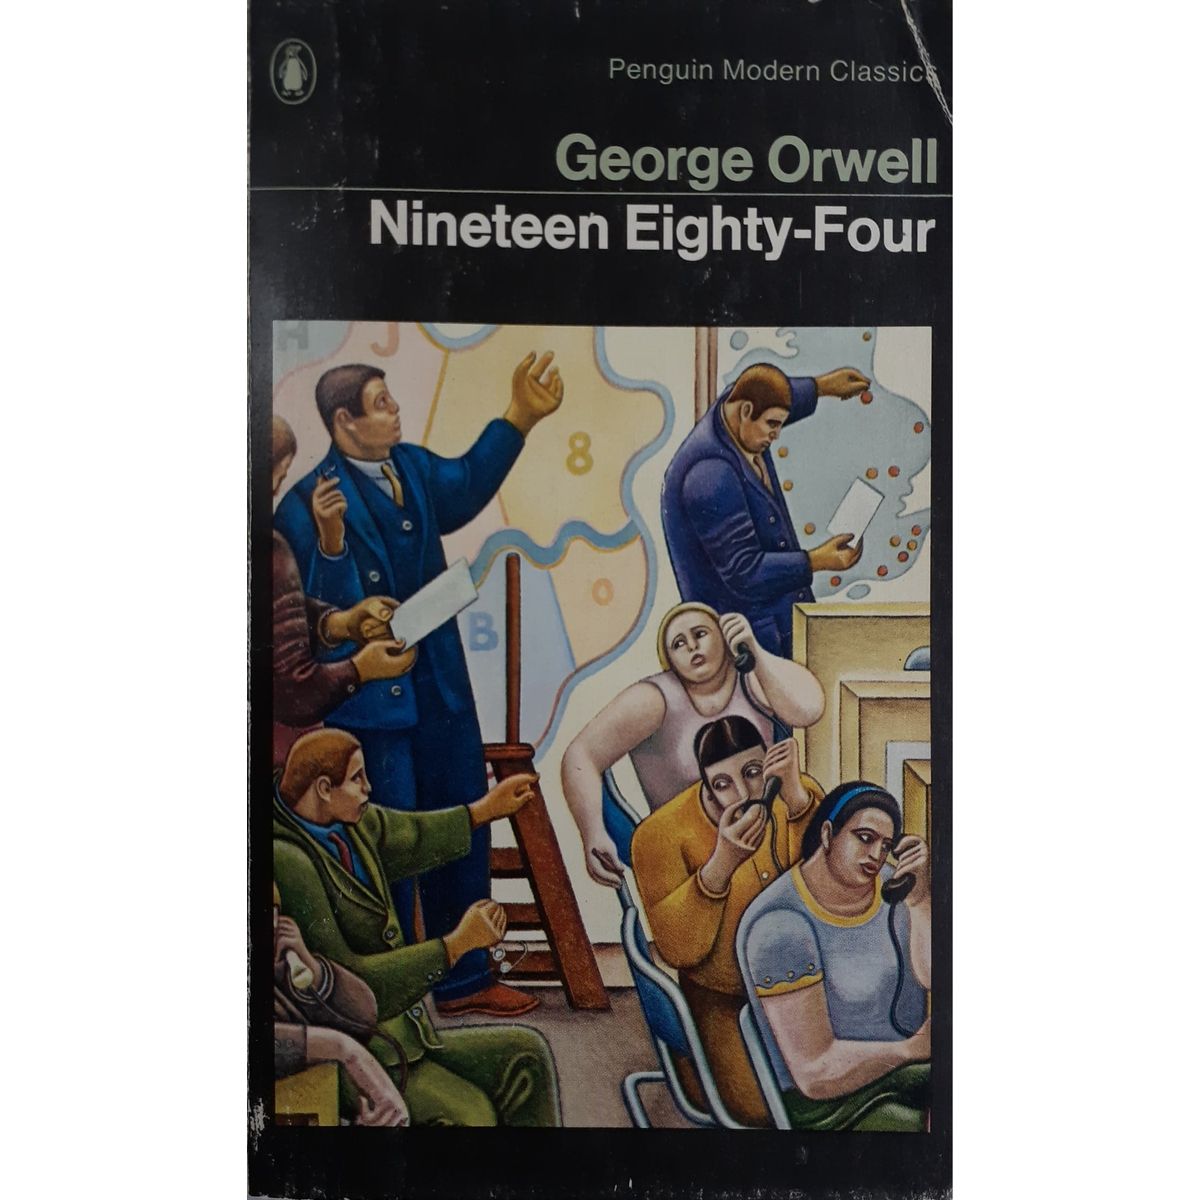 ISBN: 9780140009729 / 0140009728 - Nineteen Eighty-Four by George Orwell [1973]